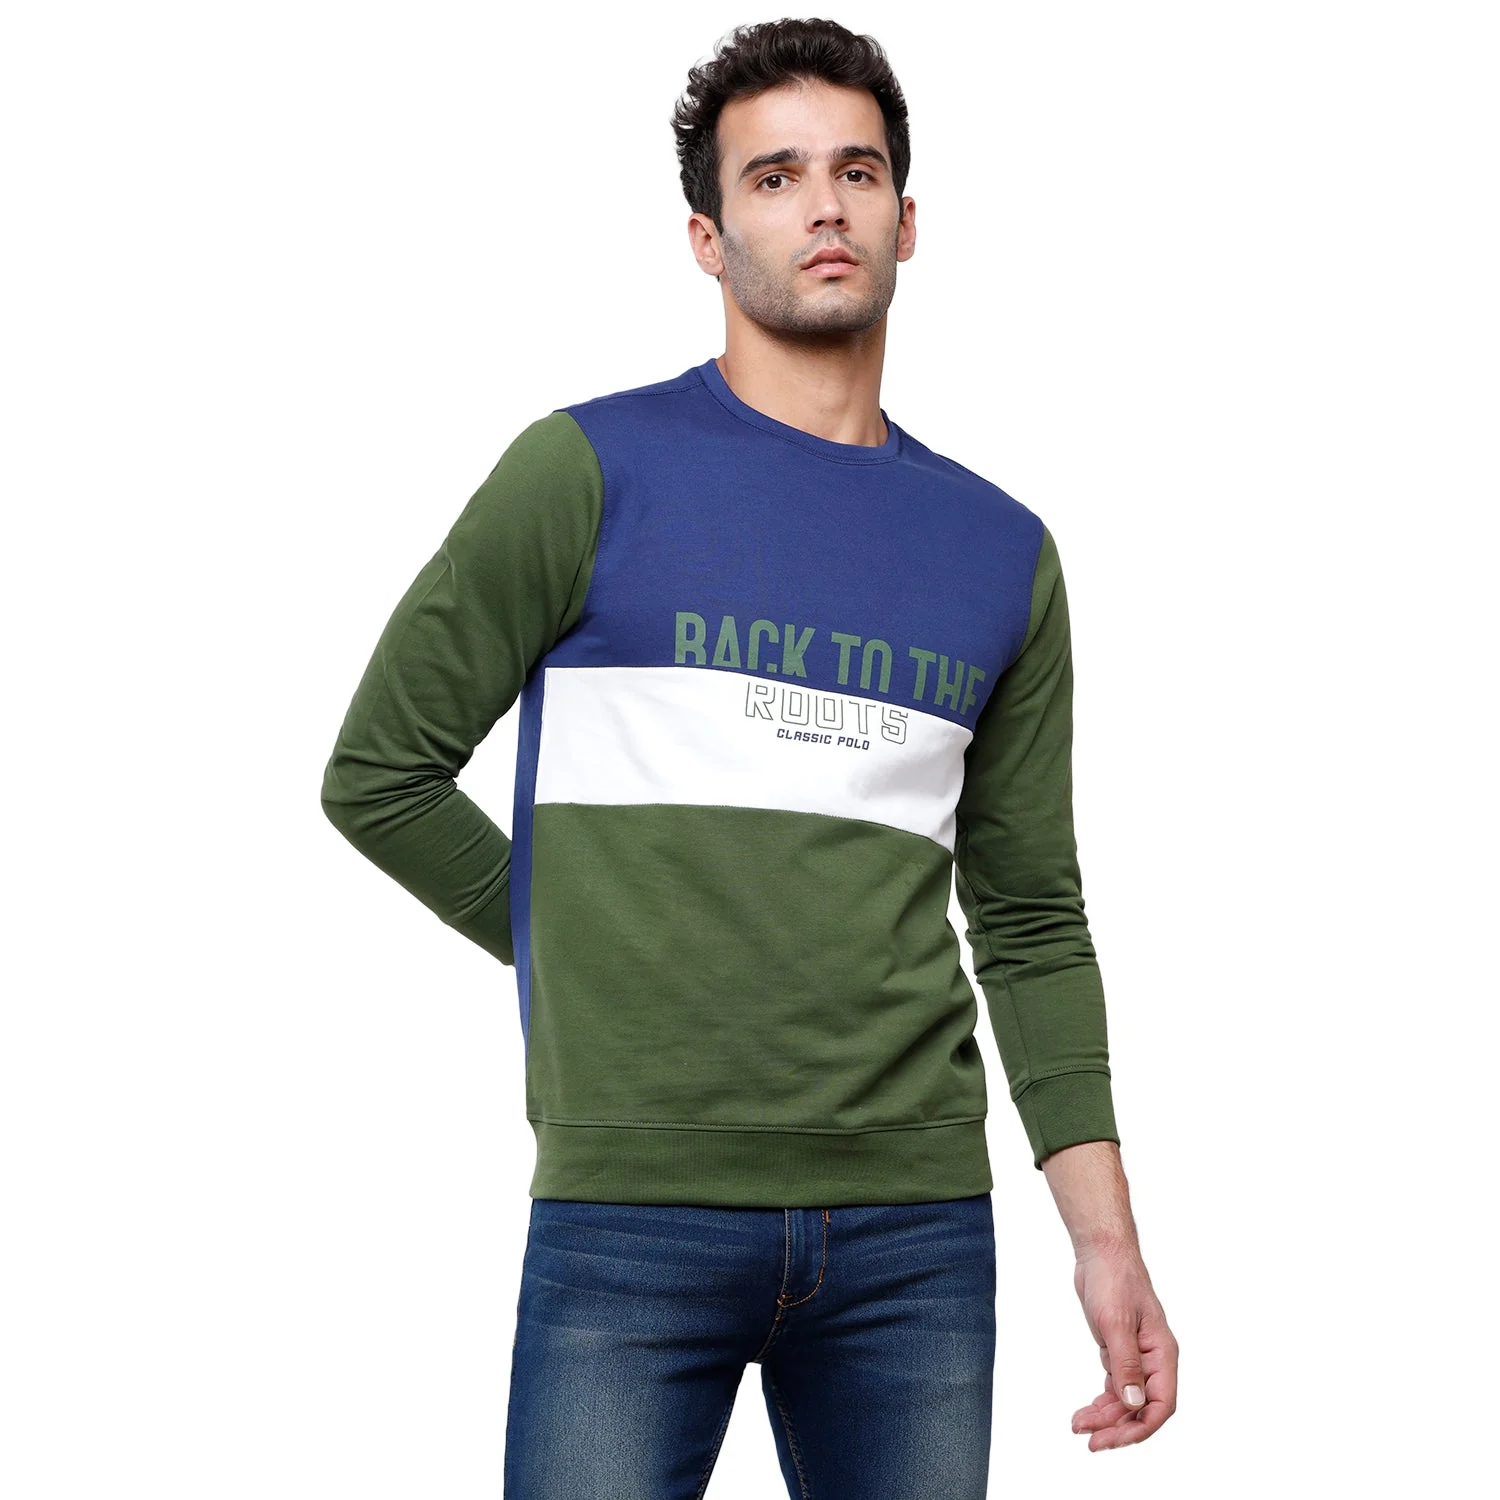 Classic Polo Men's Color Block Full Sleeve Green & Blue Sweat Shirt - CPSS-314 A